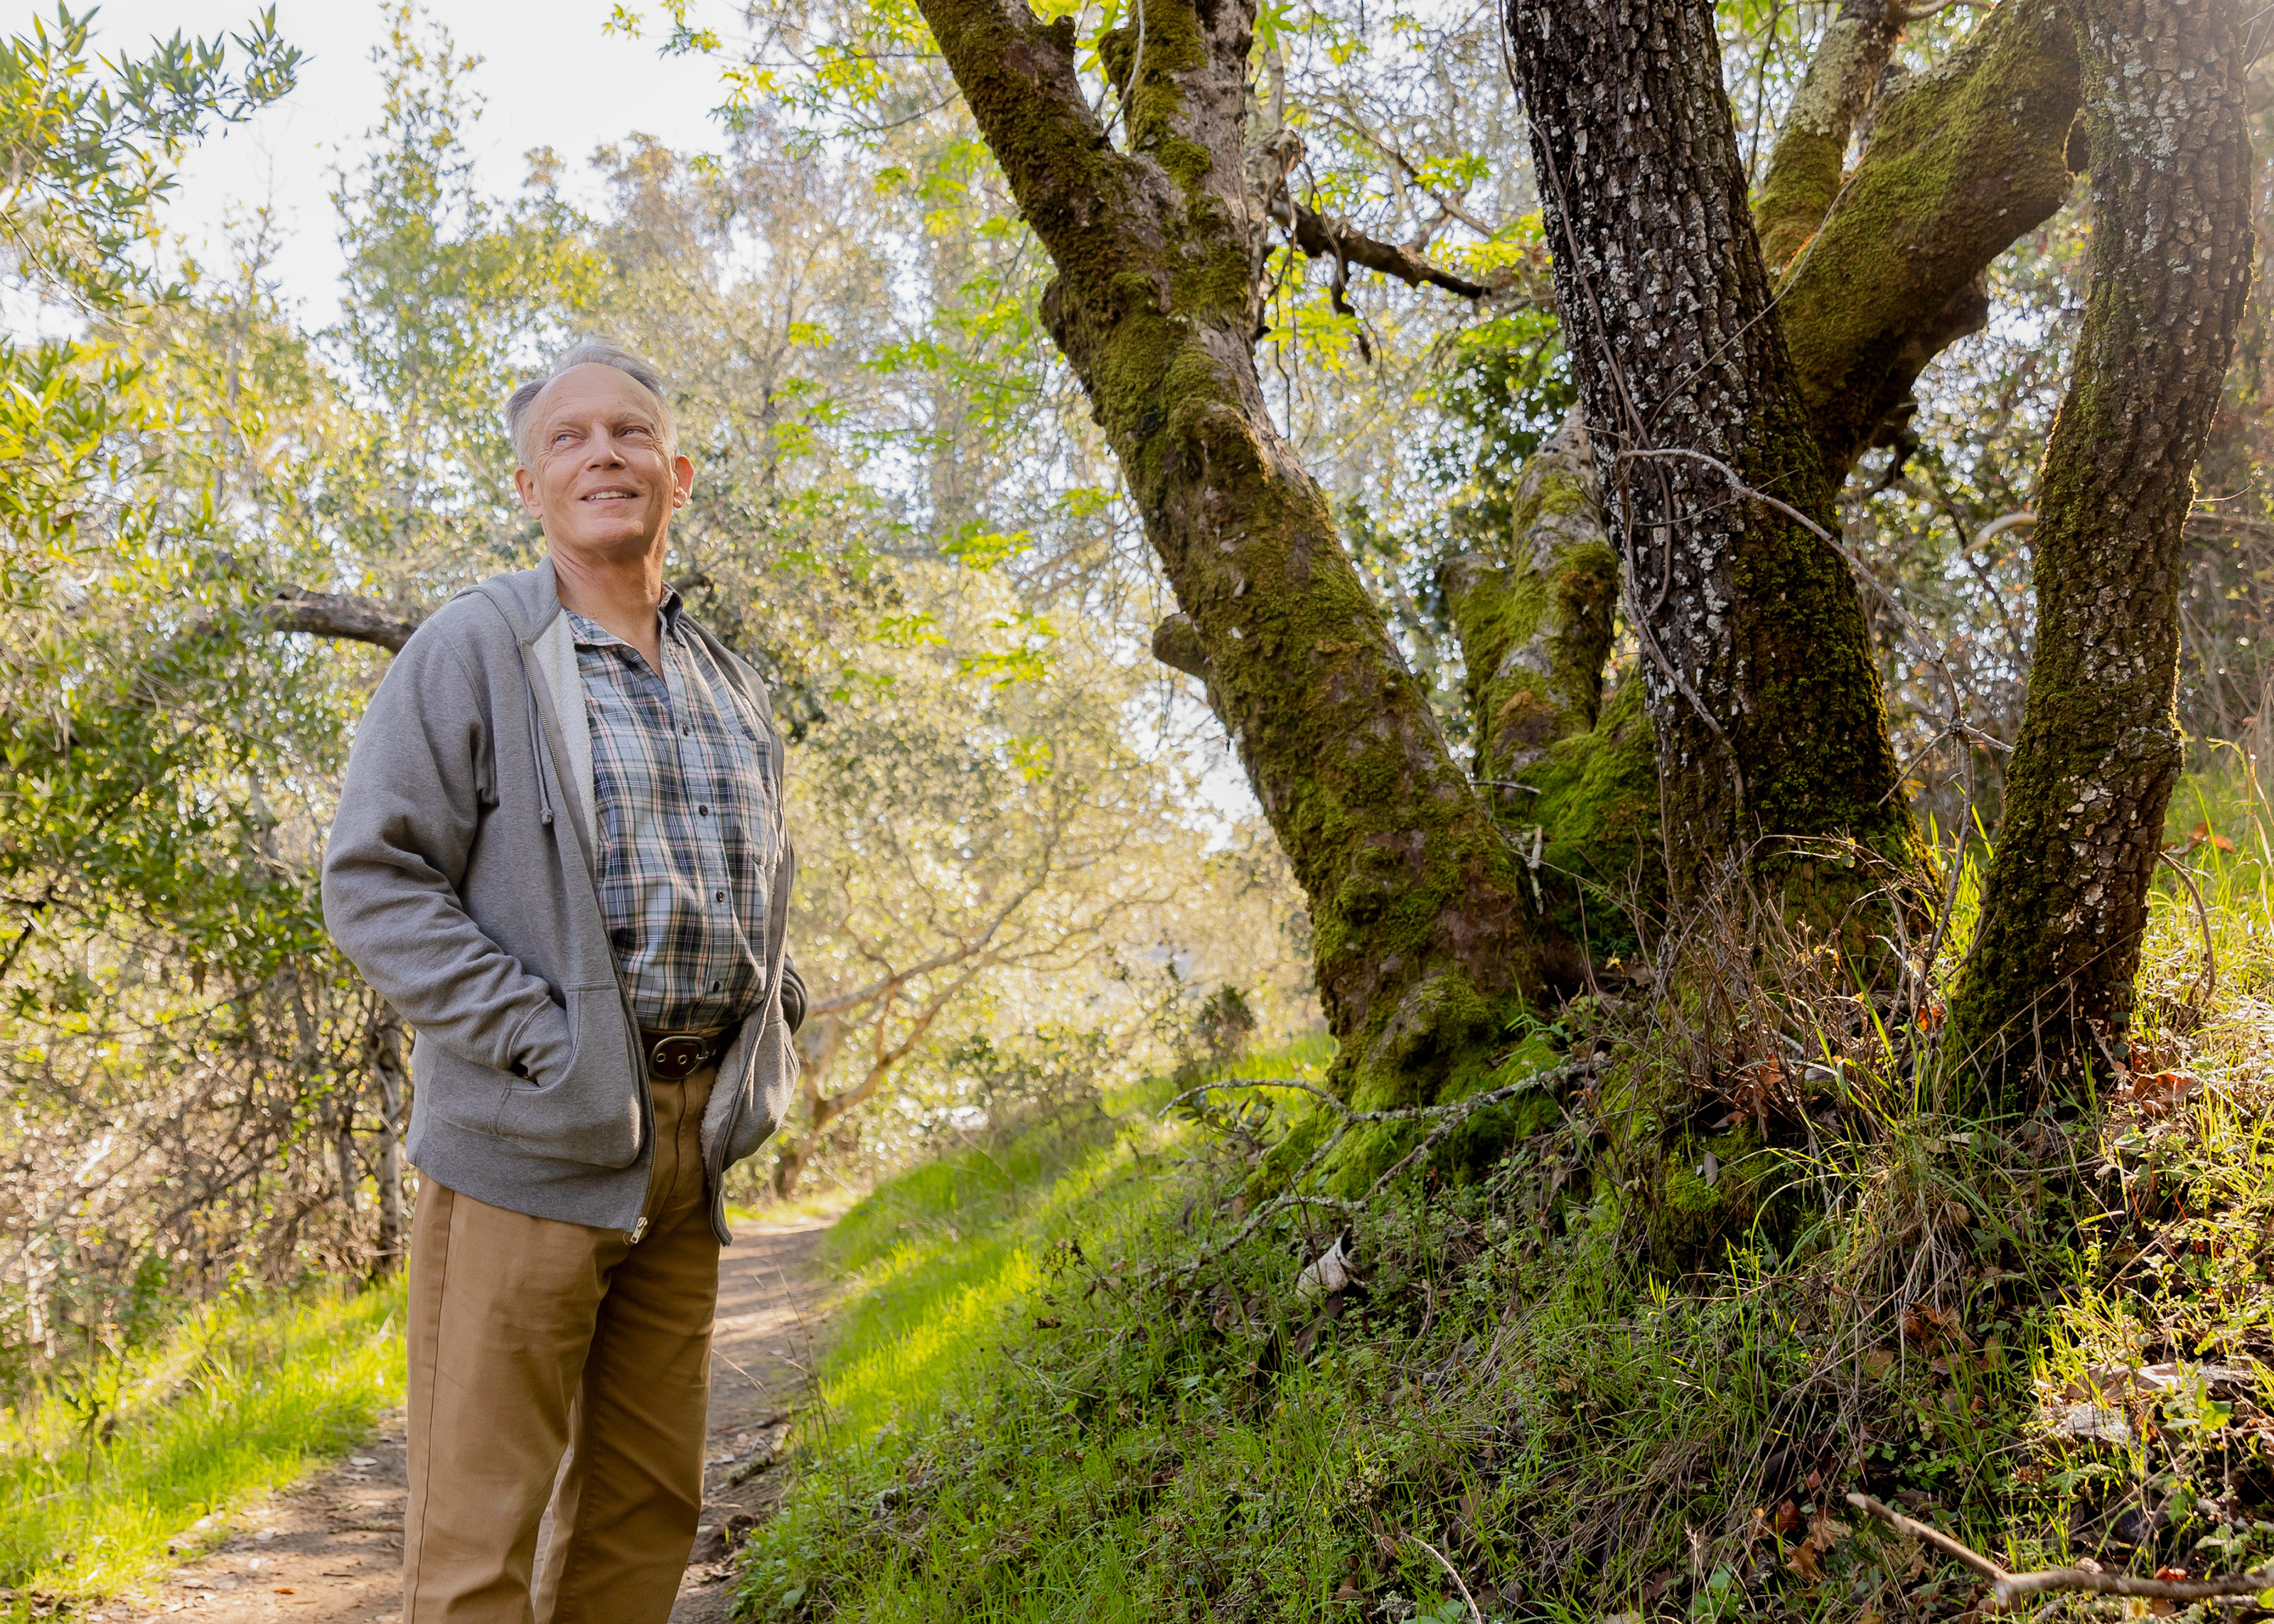 Hollis Lenderking on a hiking trail wearing hiking boots, khaki pants, and a collared shirt and grey sweater, both hands inside his sweater pockets, surrounded by trees and a blue sky in the background.